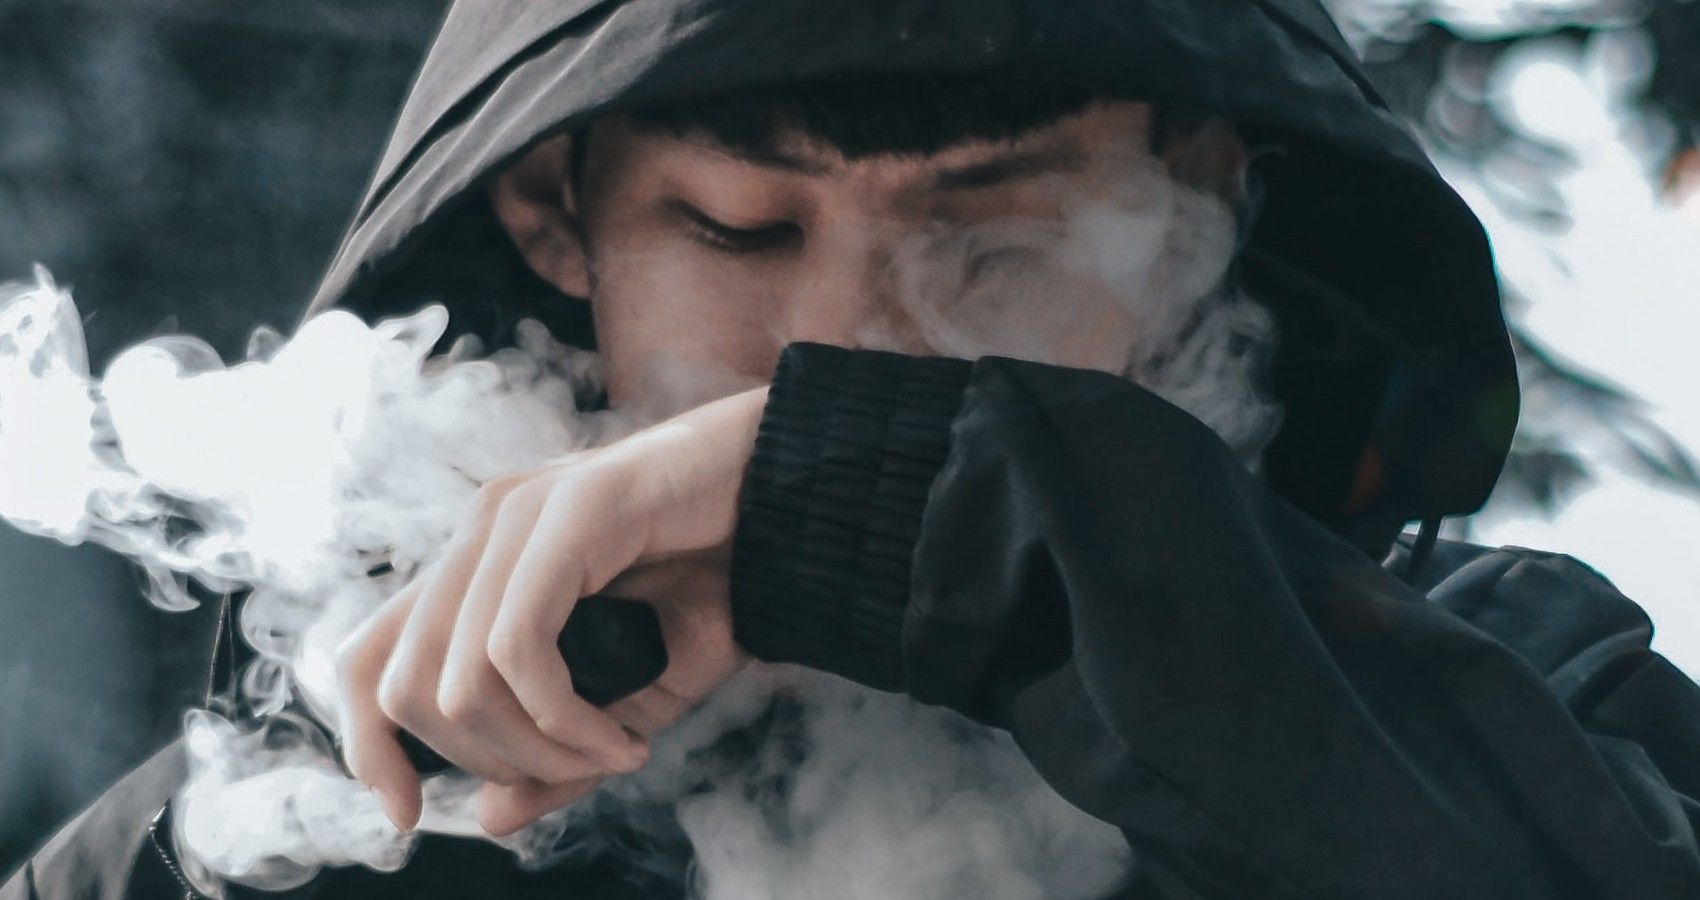 A Youh Vaping In A Black Sweater With Smoke